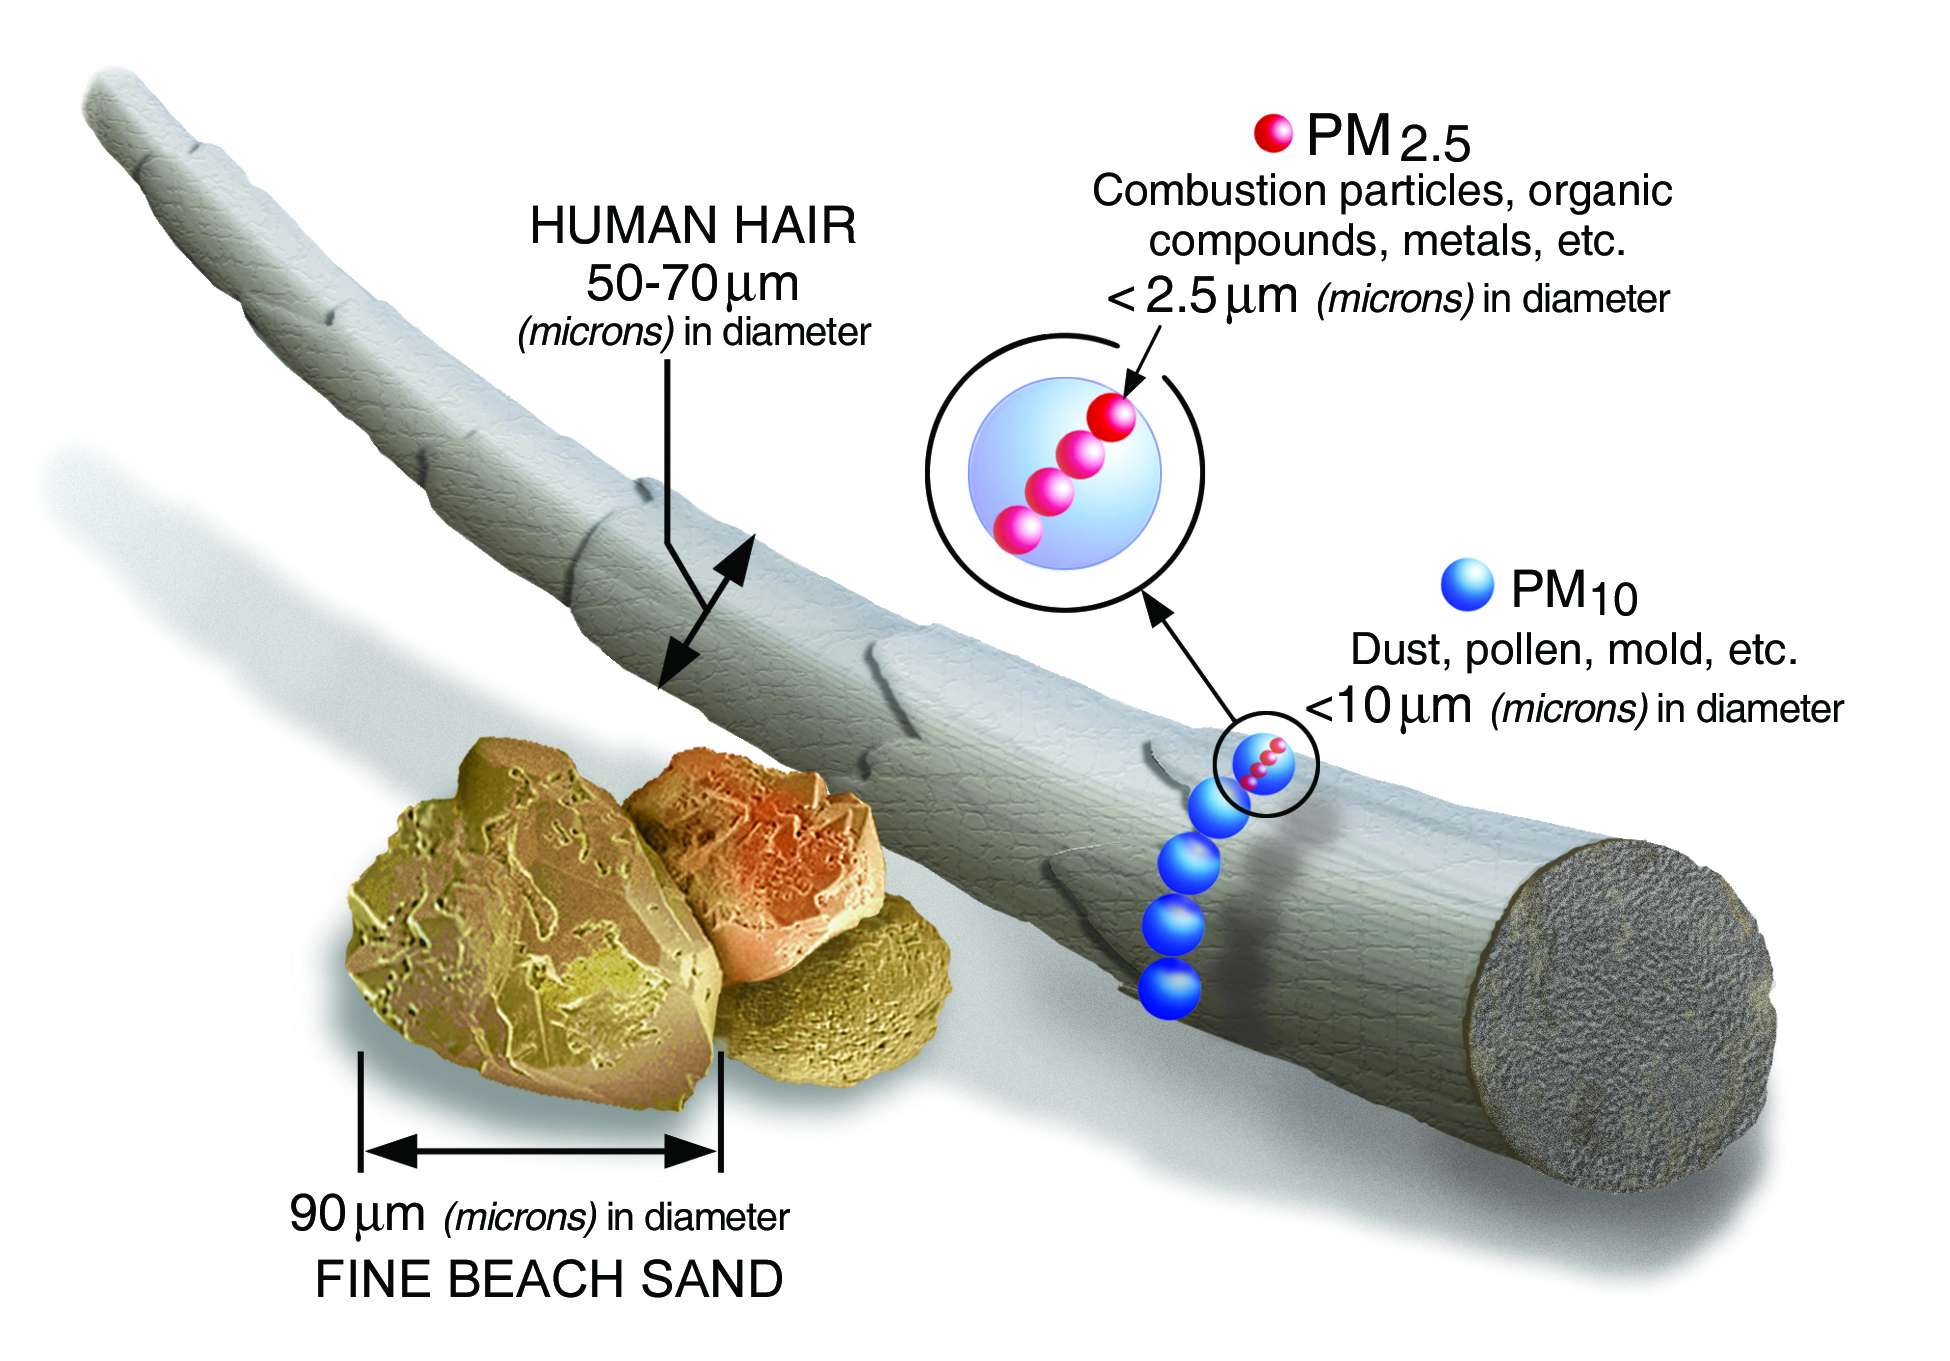 Size comparisons for particulate matter particles